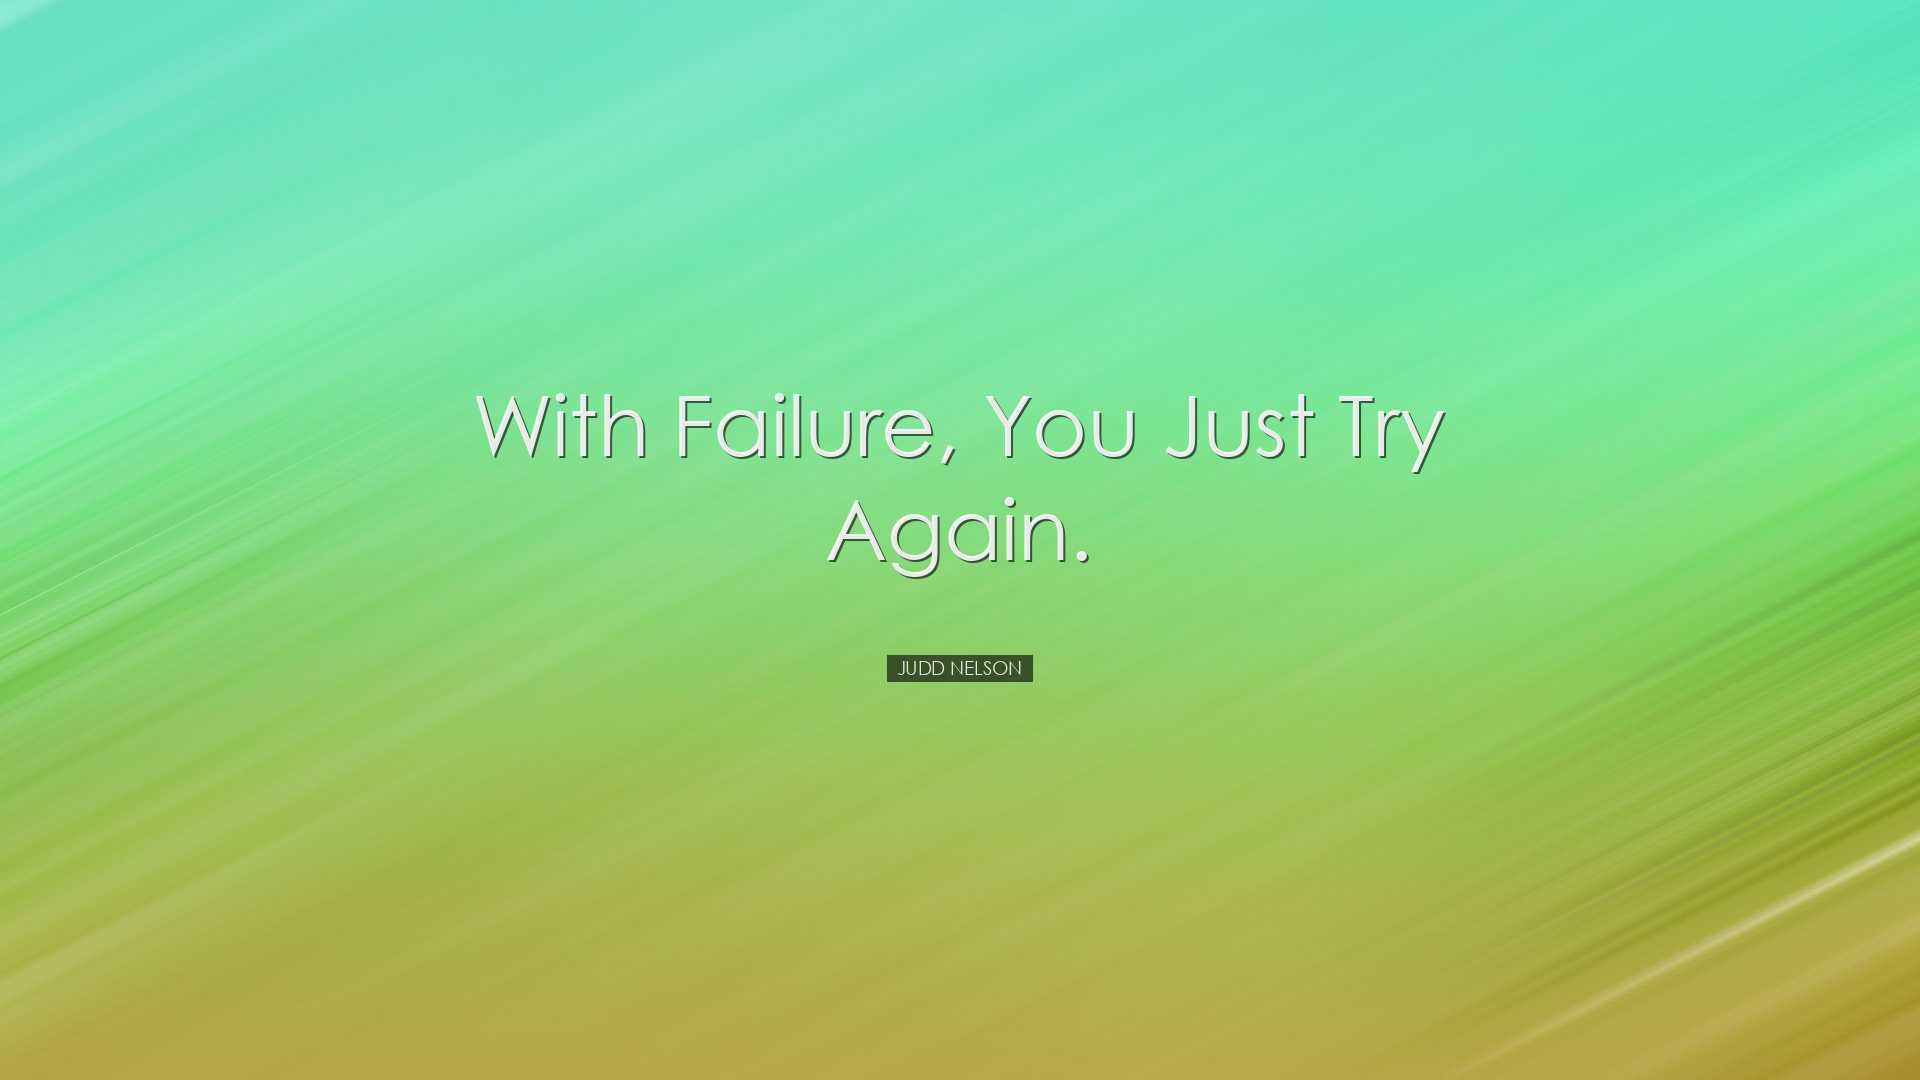 With failure, you just try again. - Judd Nelson